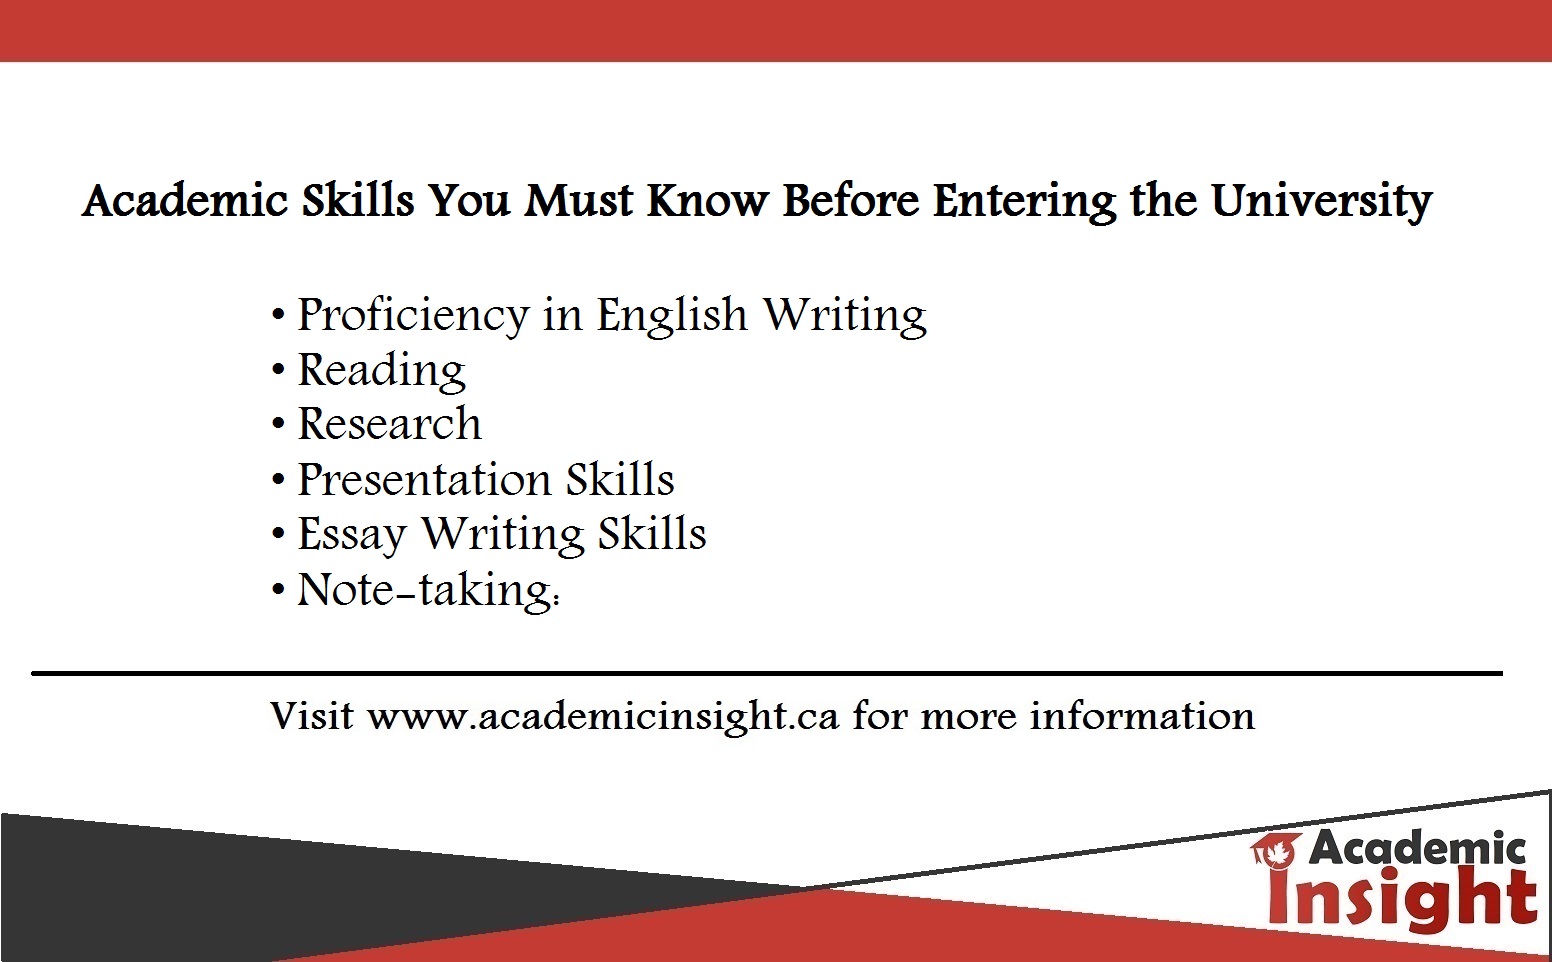 Academic Skills You Must Know Before Entering the University